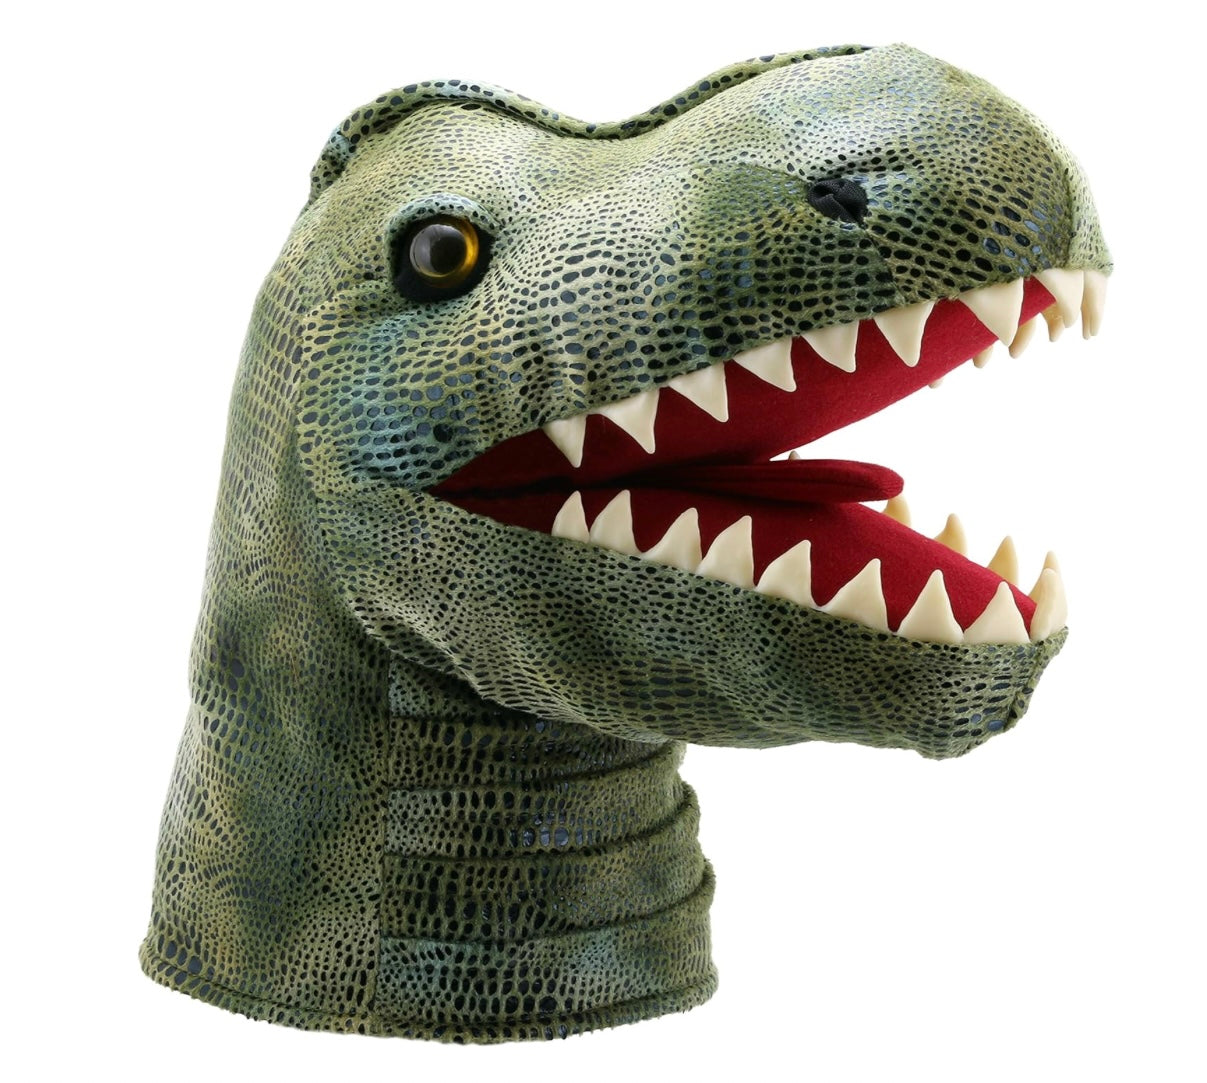 T-Rex Puppet by The Puppet Company #PC004802